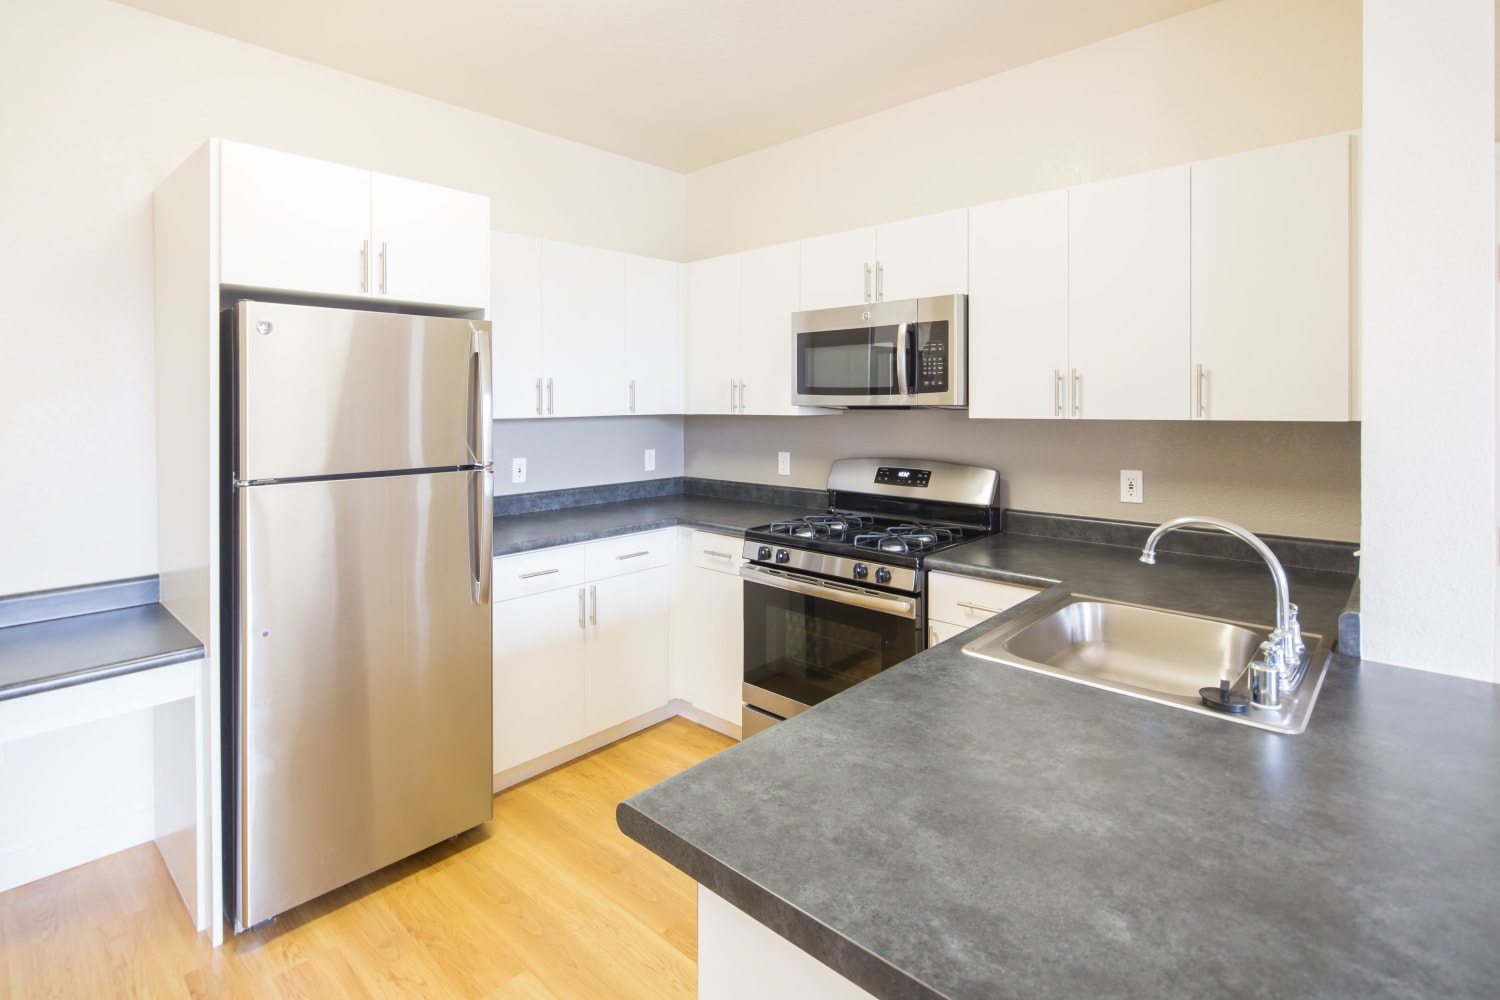 Stainless steel appliances and updated counter tops at Park Hacienda Apartments in Pleasanton, California